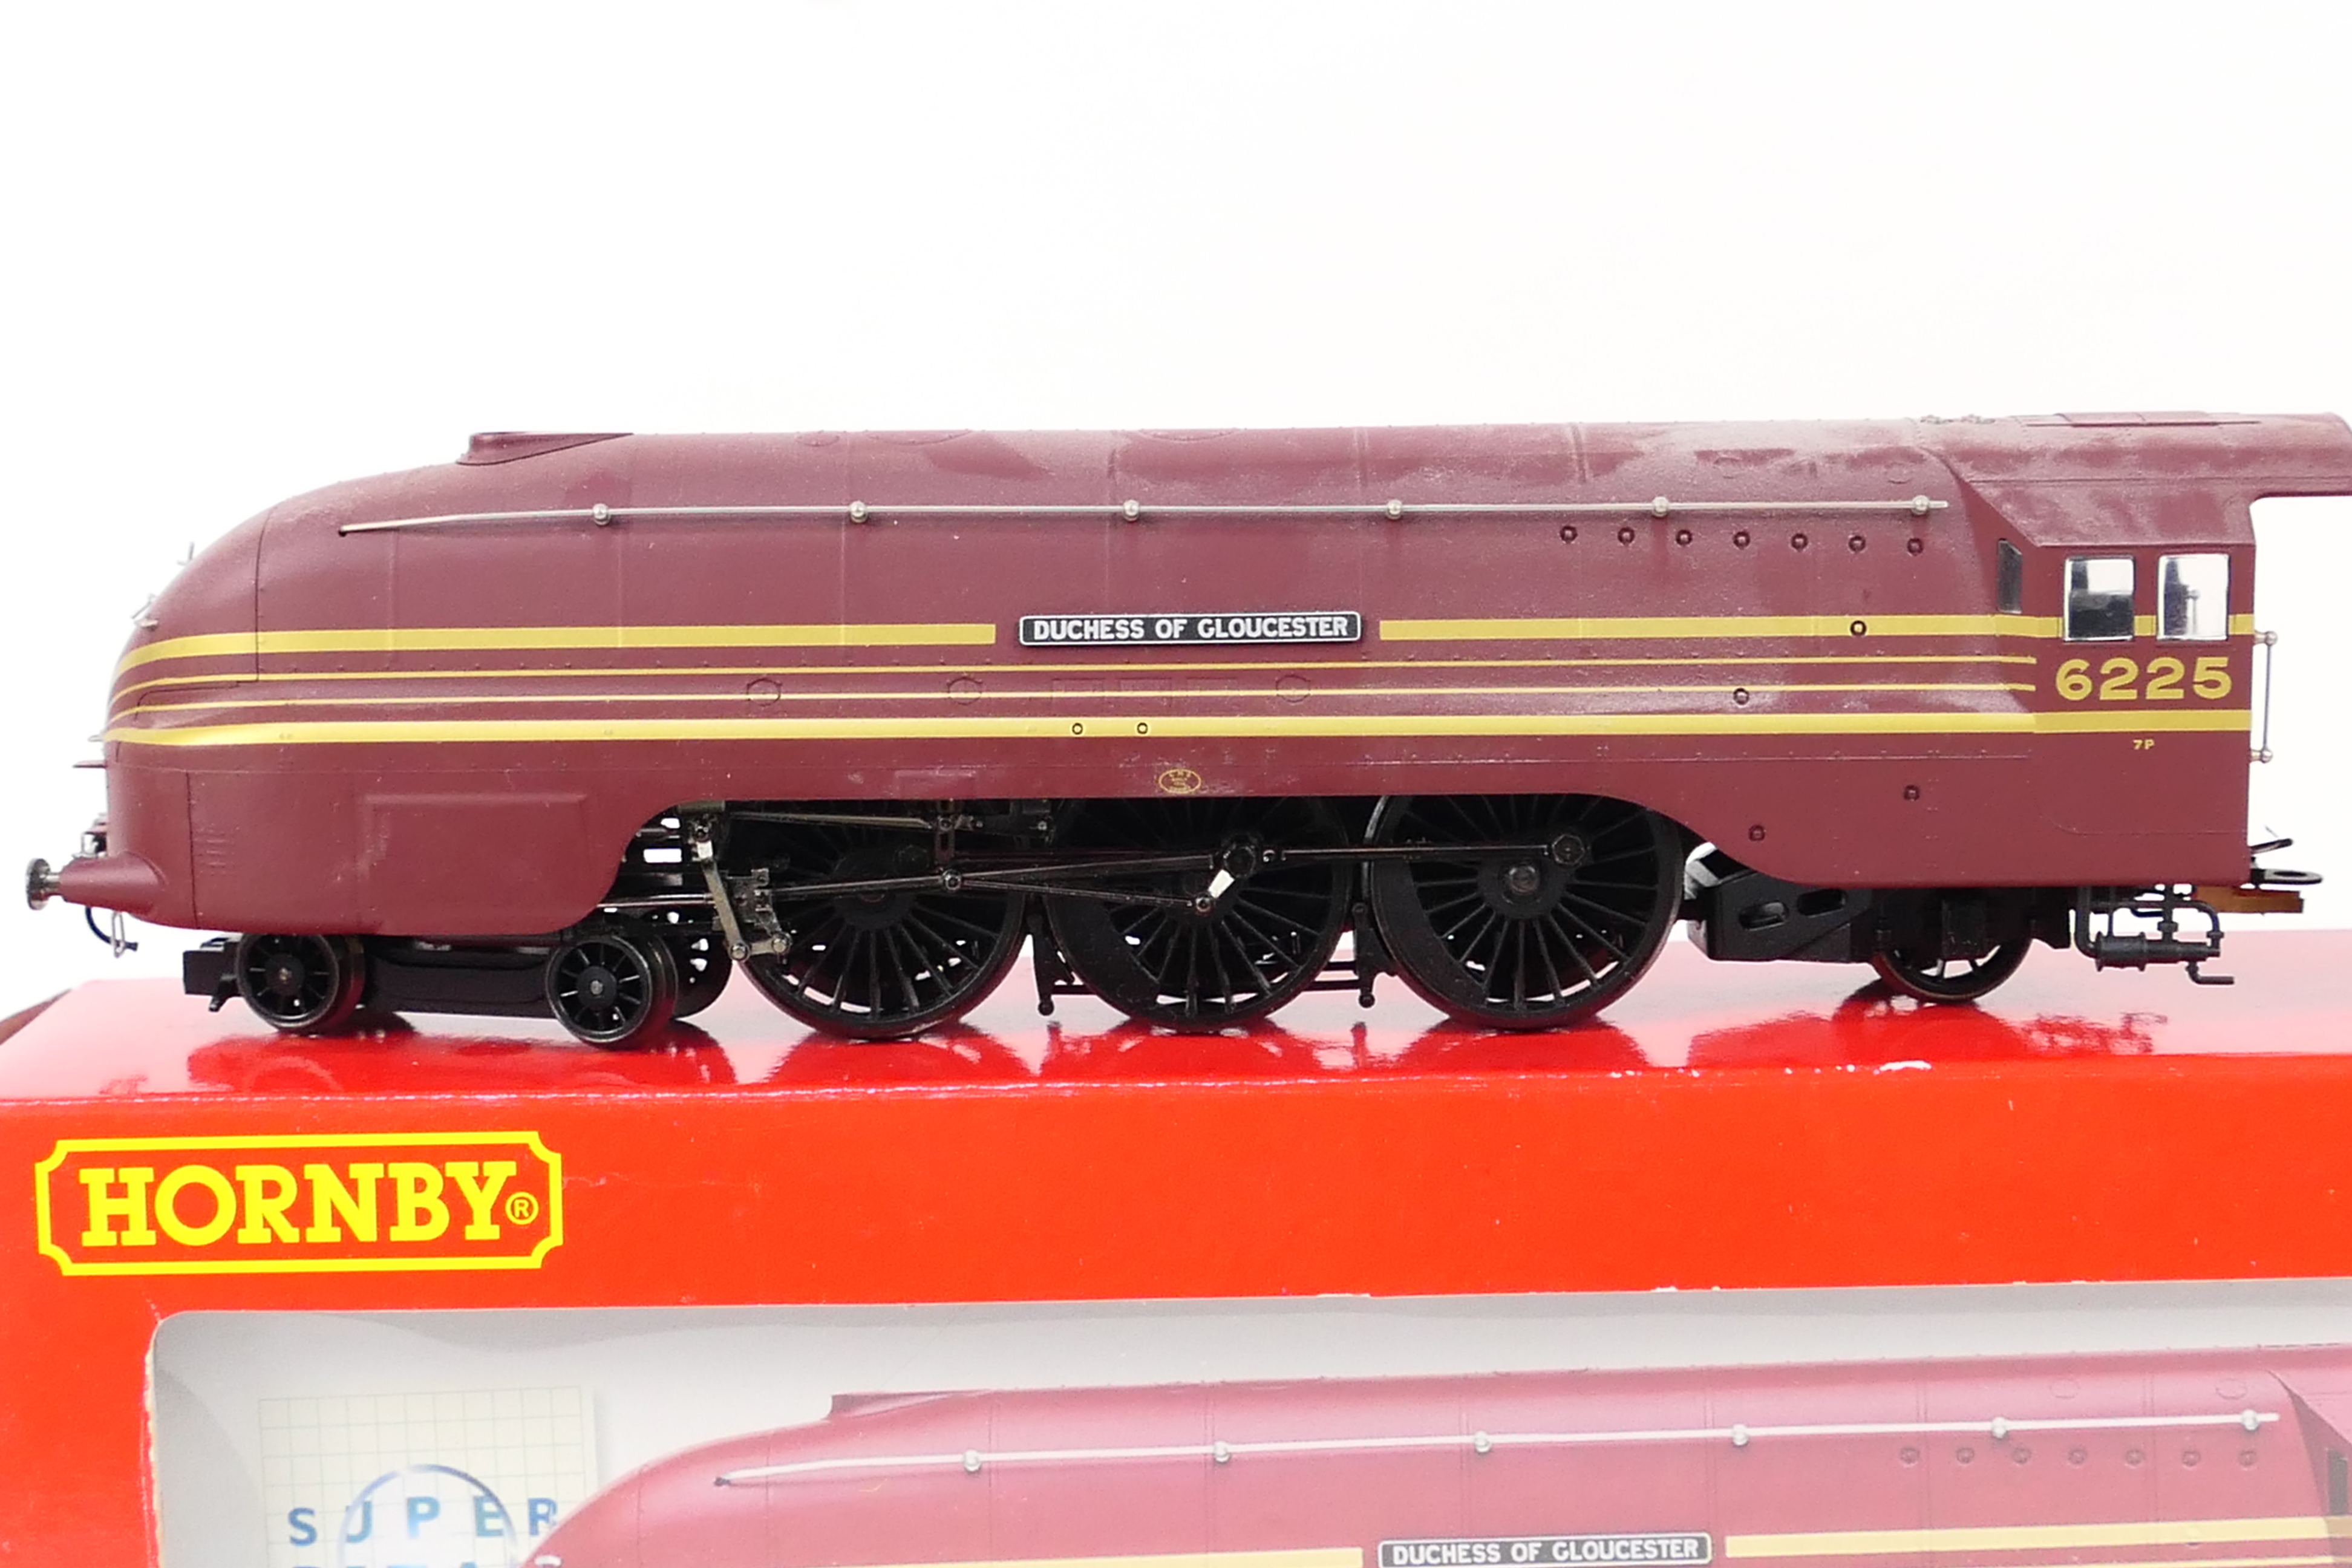 Hornby - A boxed Hornby SUPER DETAIL R2179 Coronation Class 4-6-2 steam locomotive and tender Op.No. - Image 2 of 4